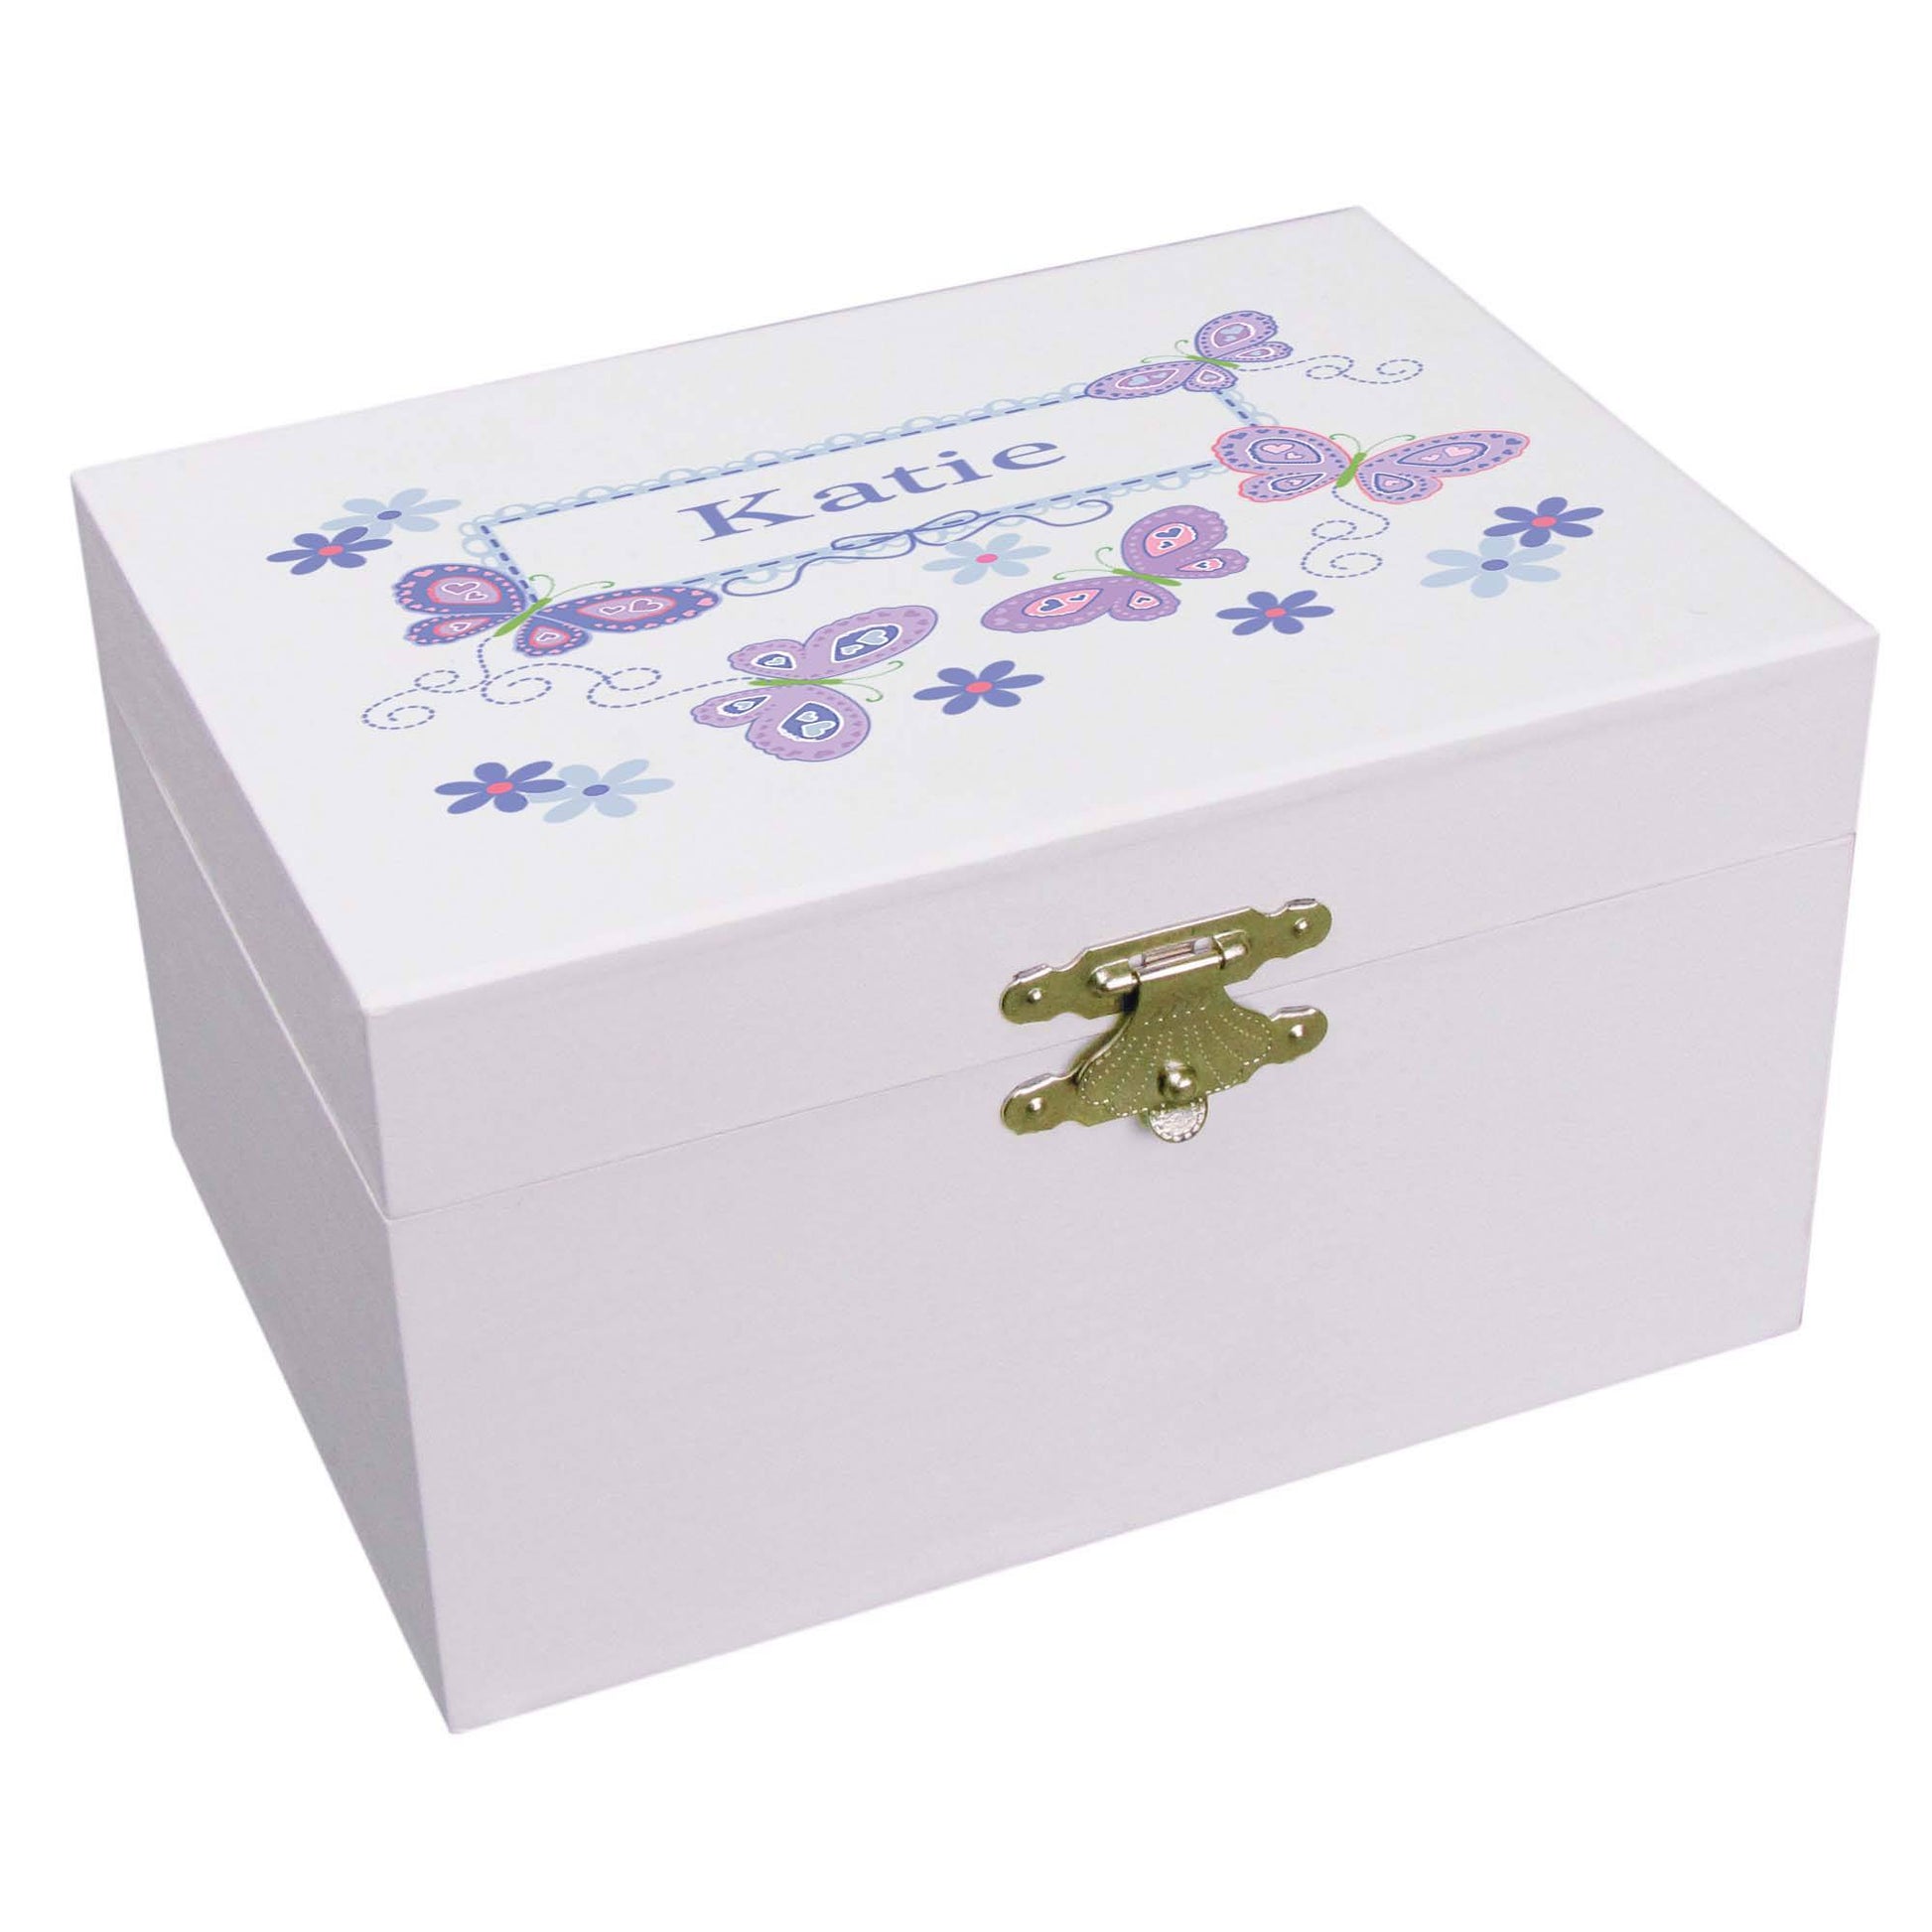 Personalized Ballerina Jewelry Box with Butterflies Lavender design